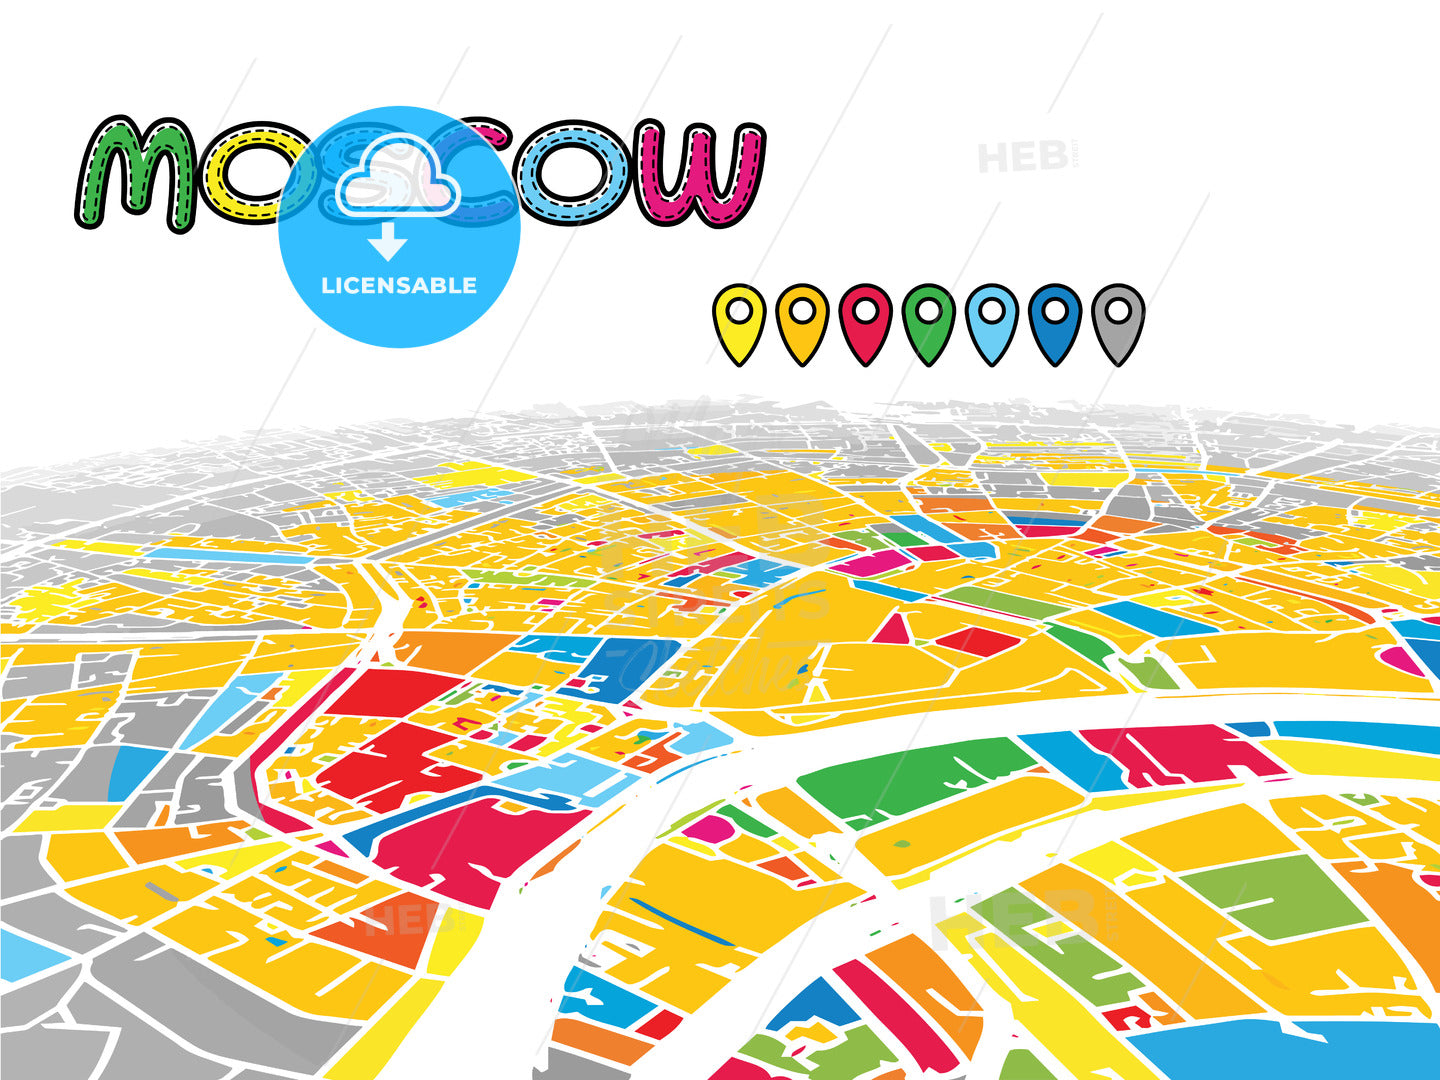 Moscow, Russia, downtown map in perspective